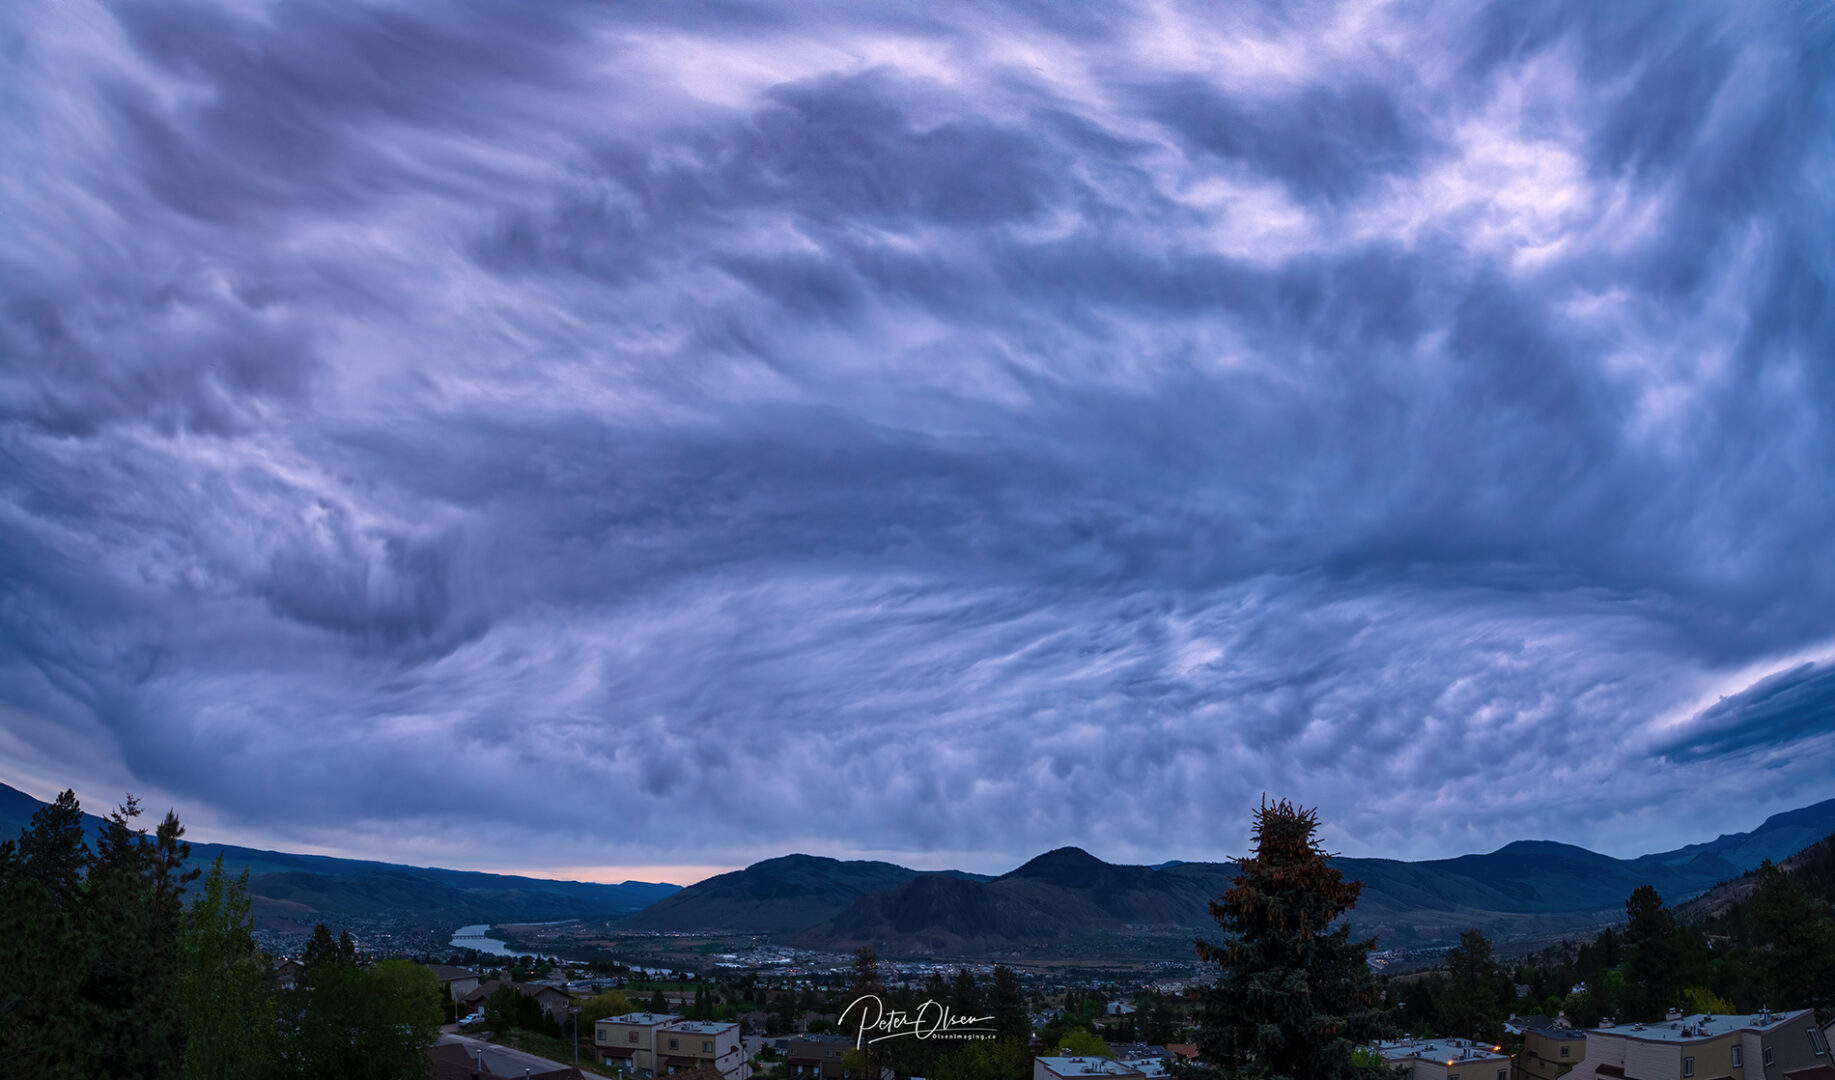 Kamloops City sky covered with clouds and mountain with city